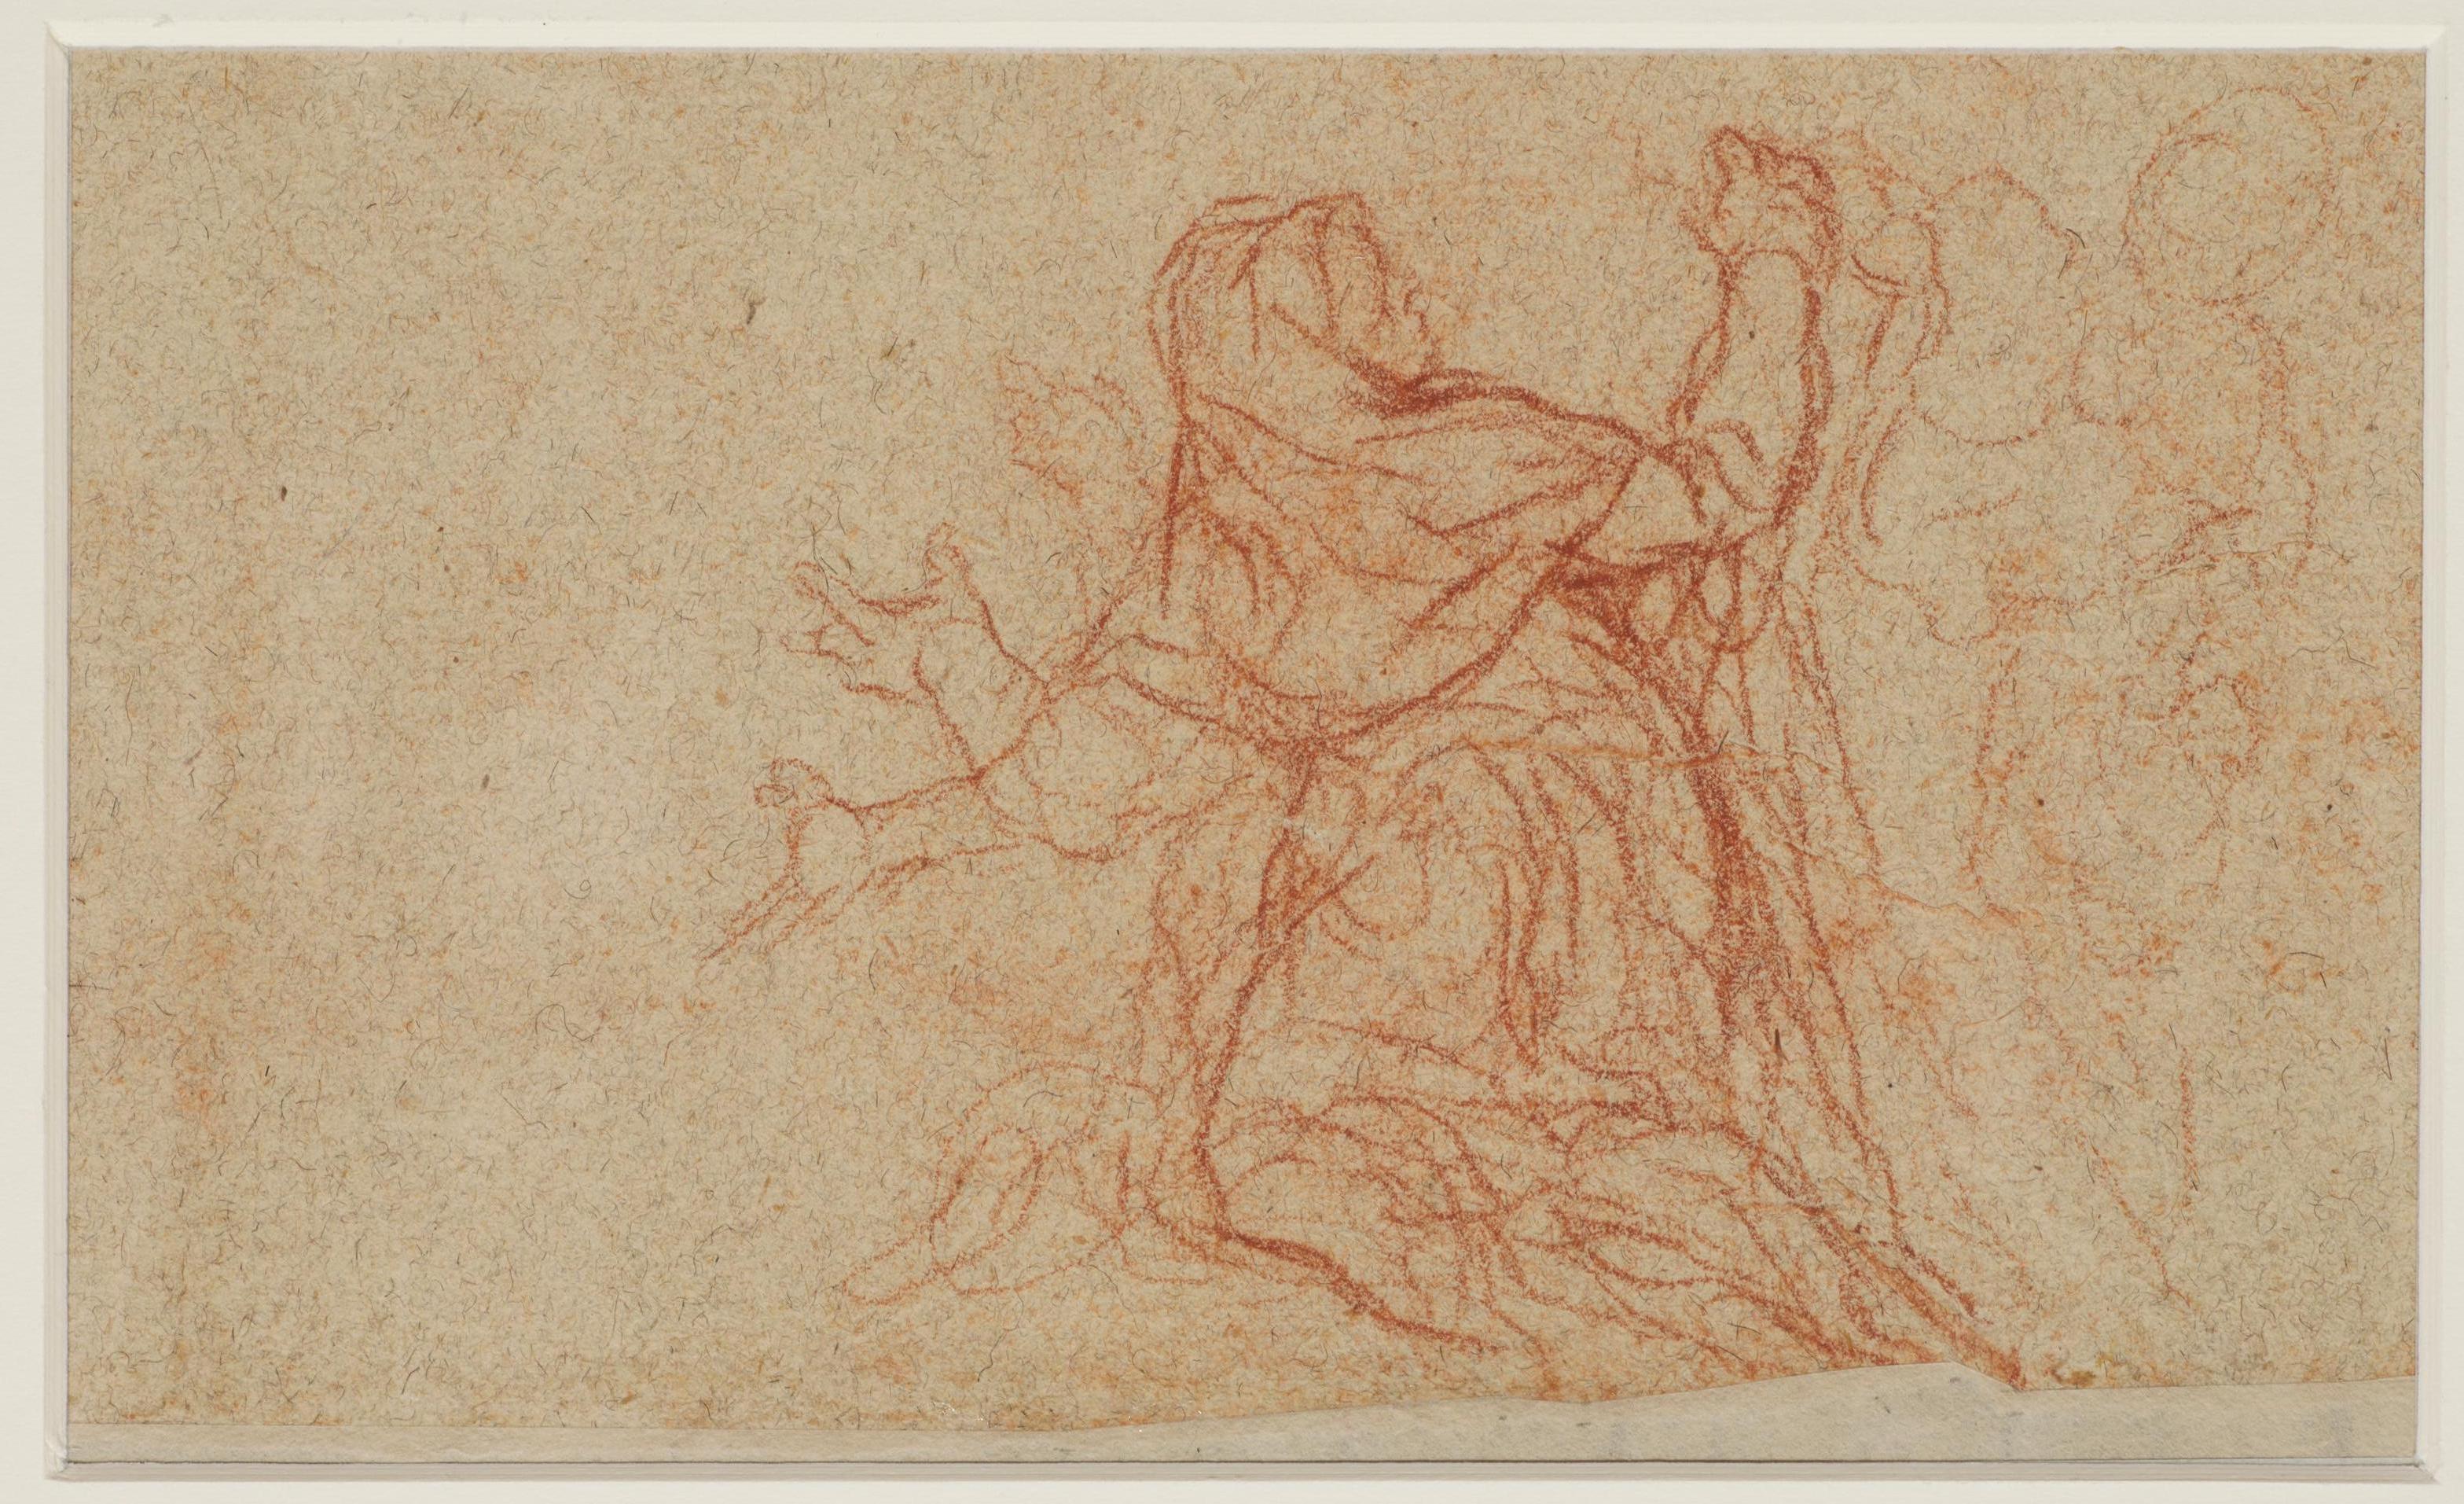 This fresh sanguine sheet presents various studies placed next to each other in no apparent order. Two of the feet studies are preparatory to the first major commission received by the young Baldassare Franceschini, shortly after his installation in